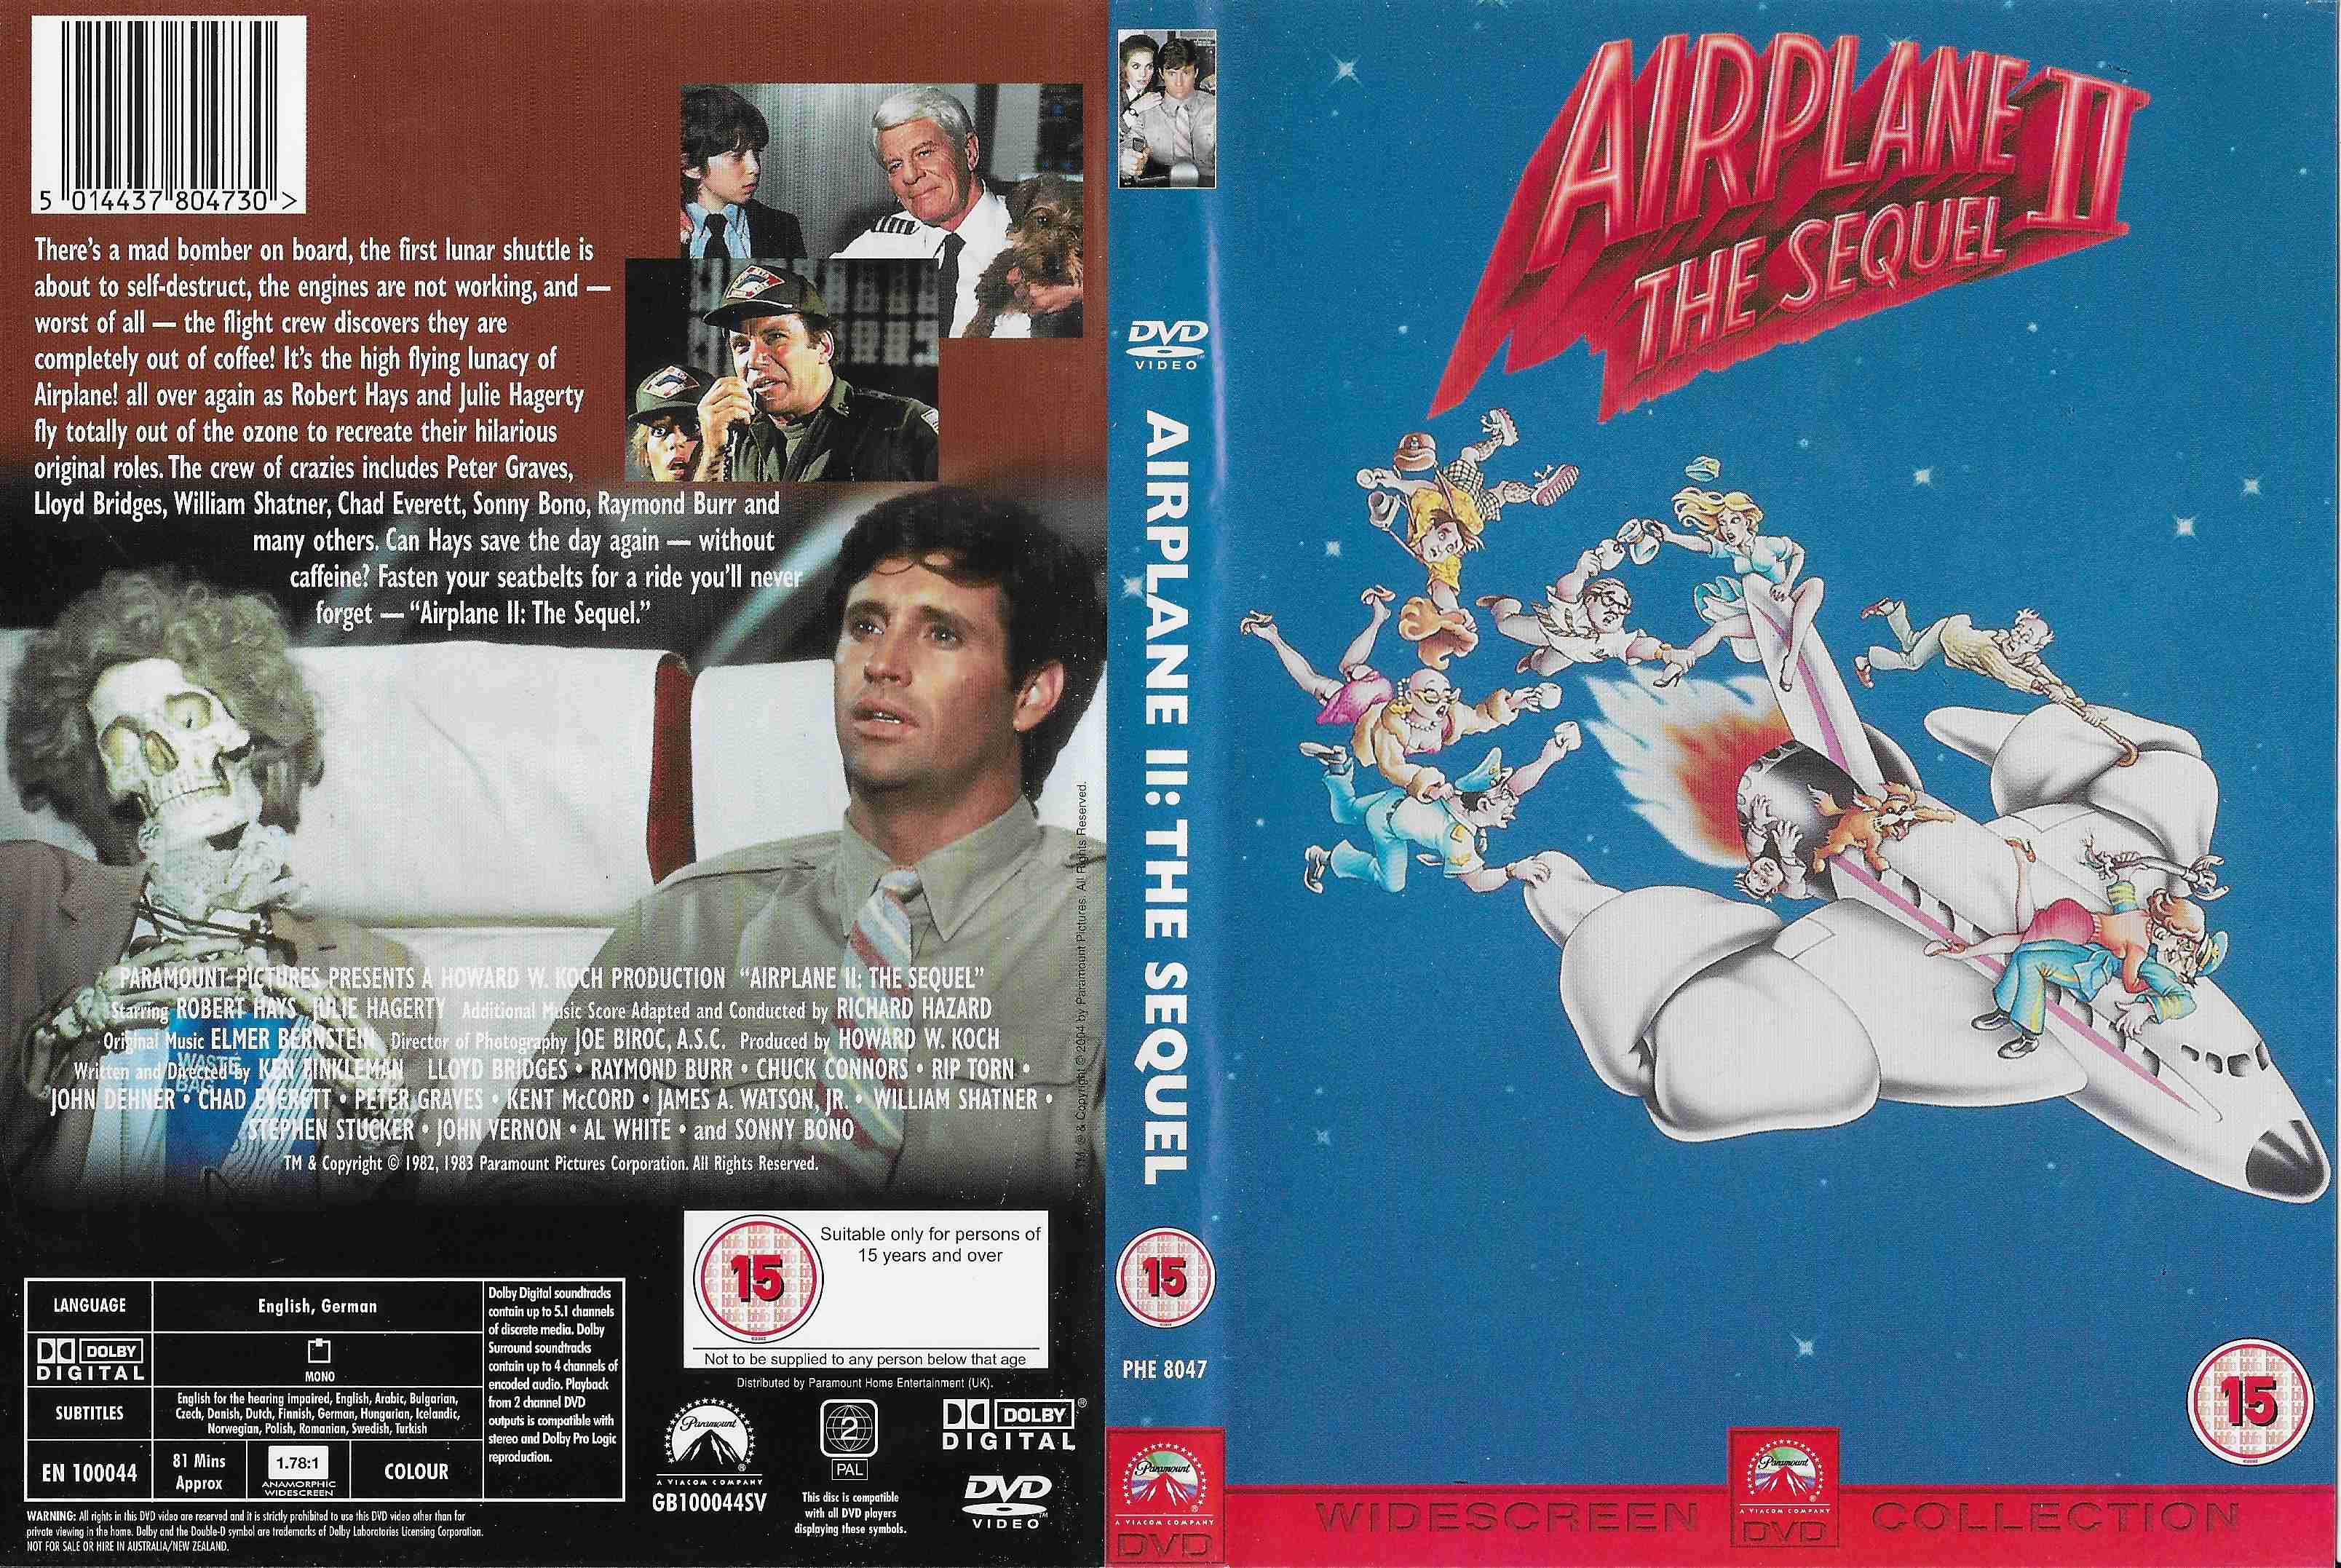 Picture of PHE 8047 Airplane II - The sequel by artist Ken Finkleman from ITV, Channel 4 and Channel 5 library